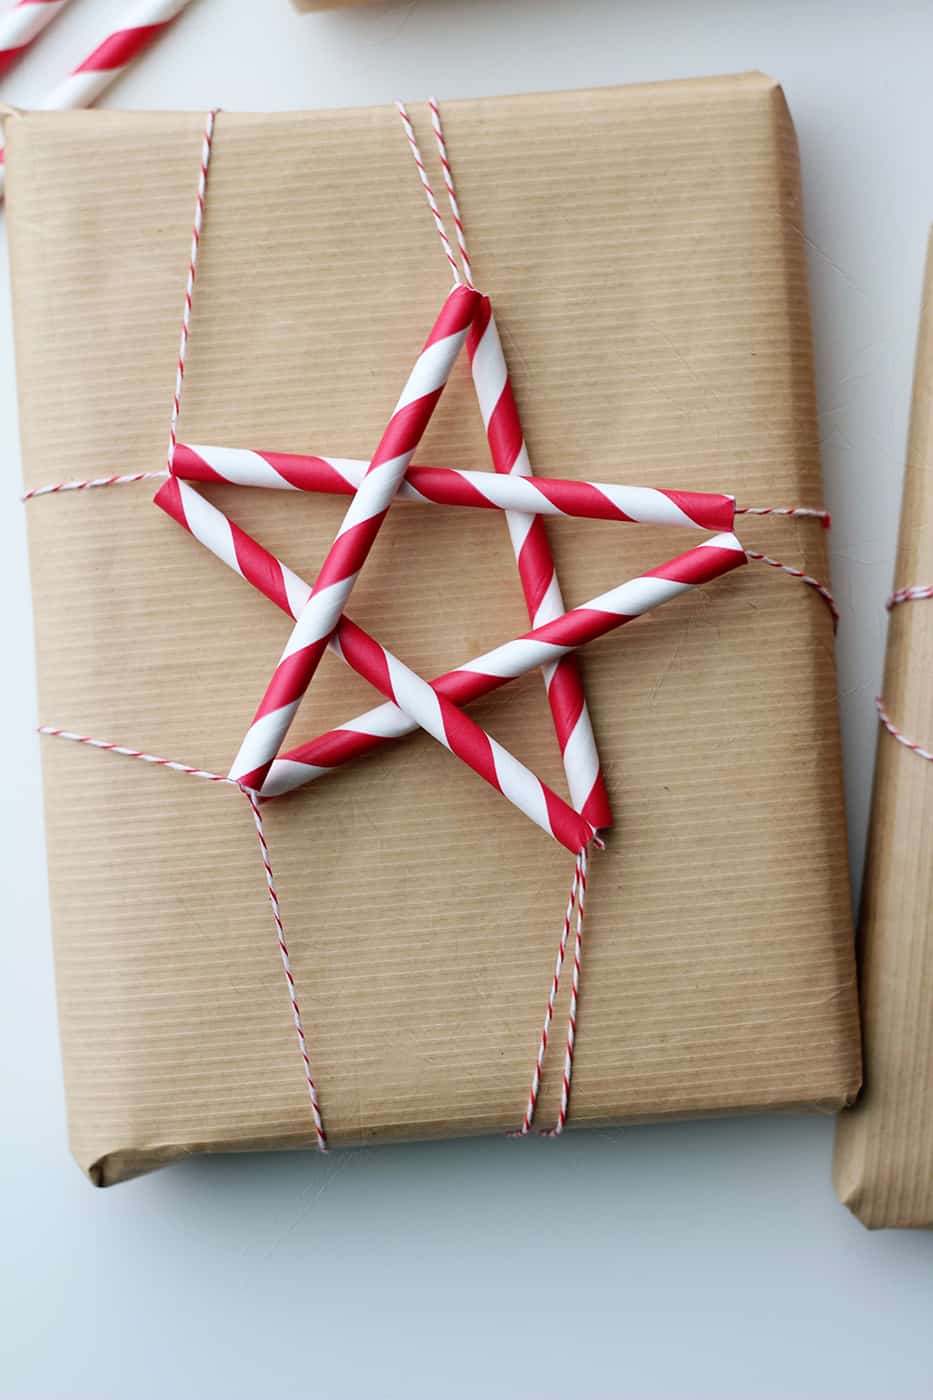 Brown paper package with star made of red and white striped straws.